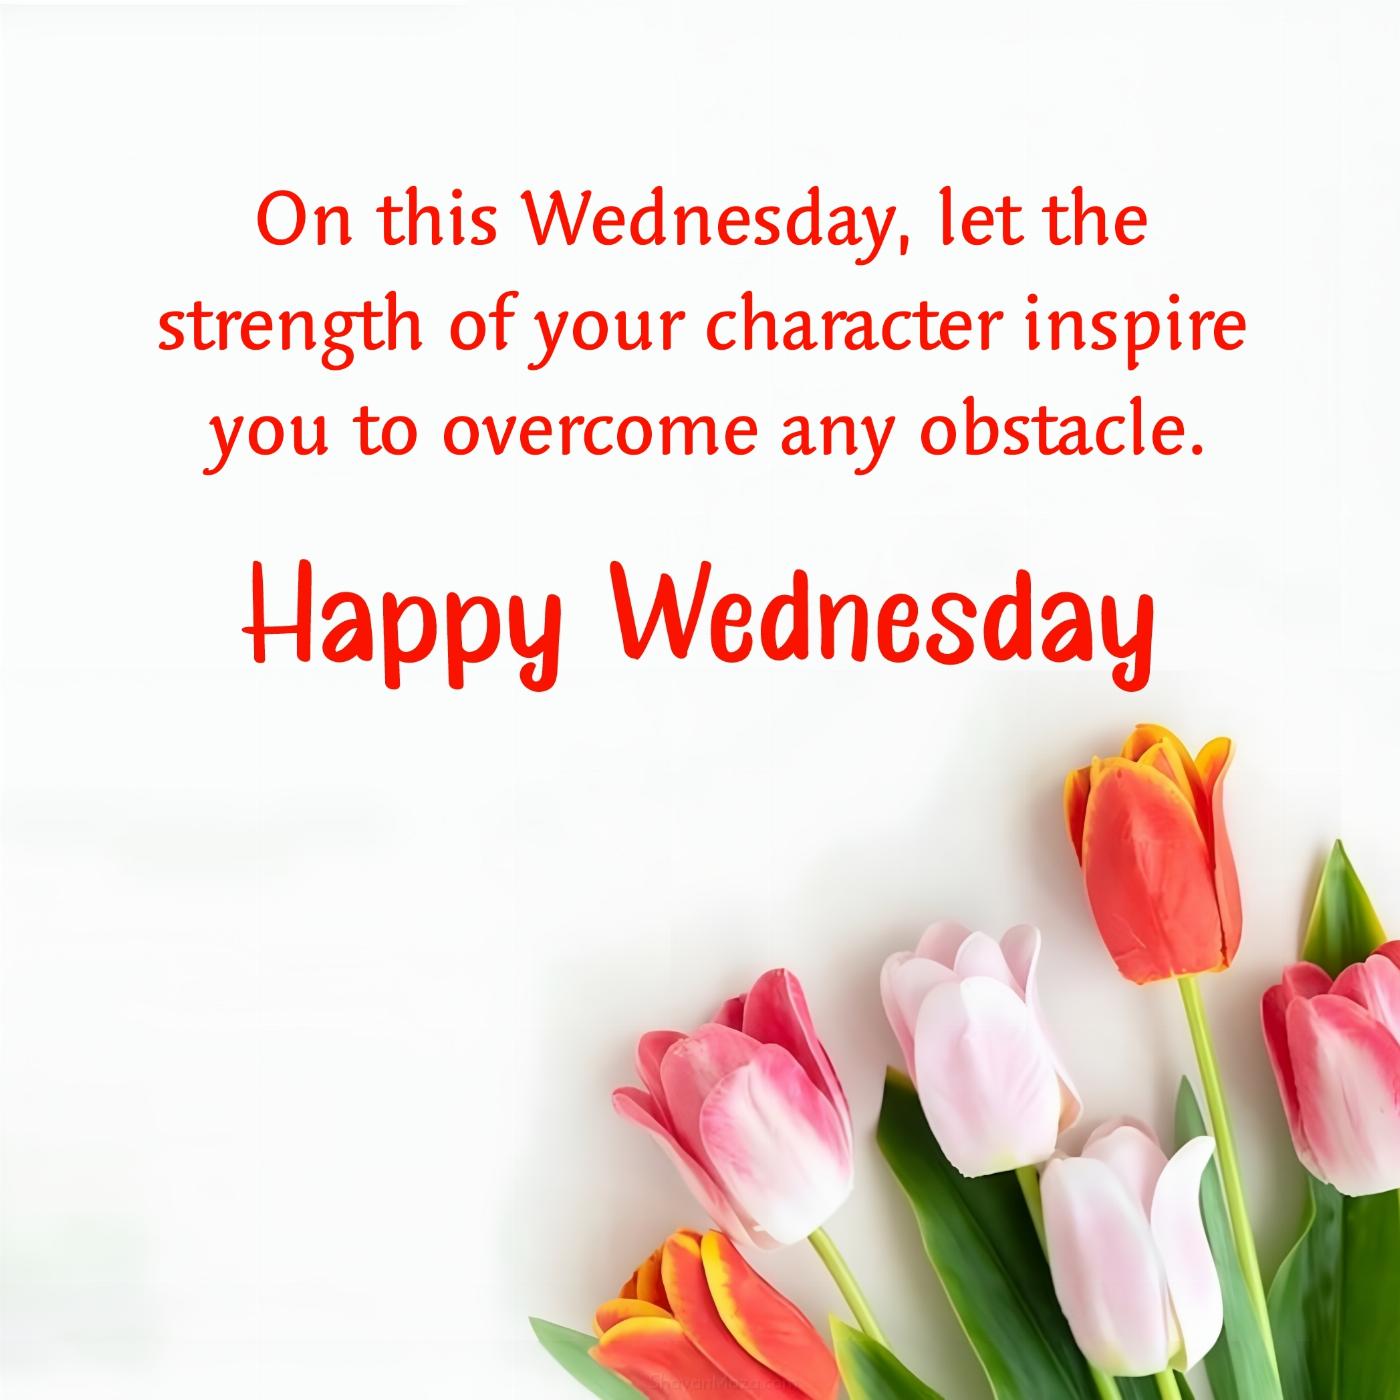 On this Wednesday let the strength of your character inspire you